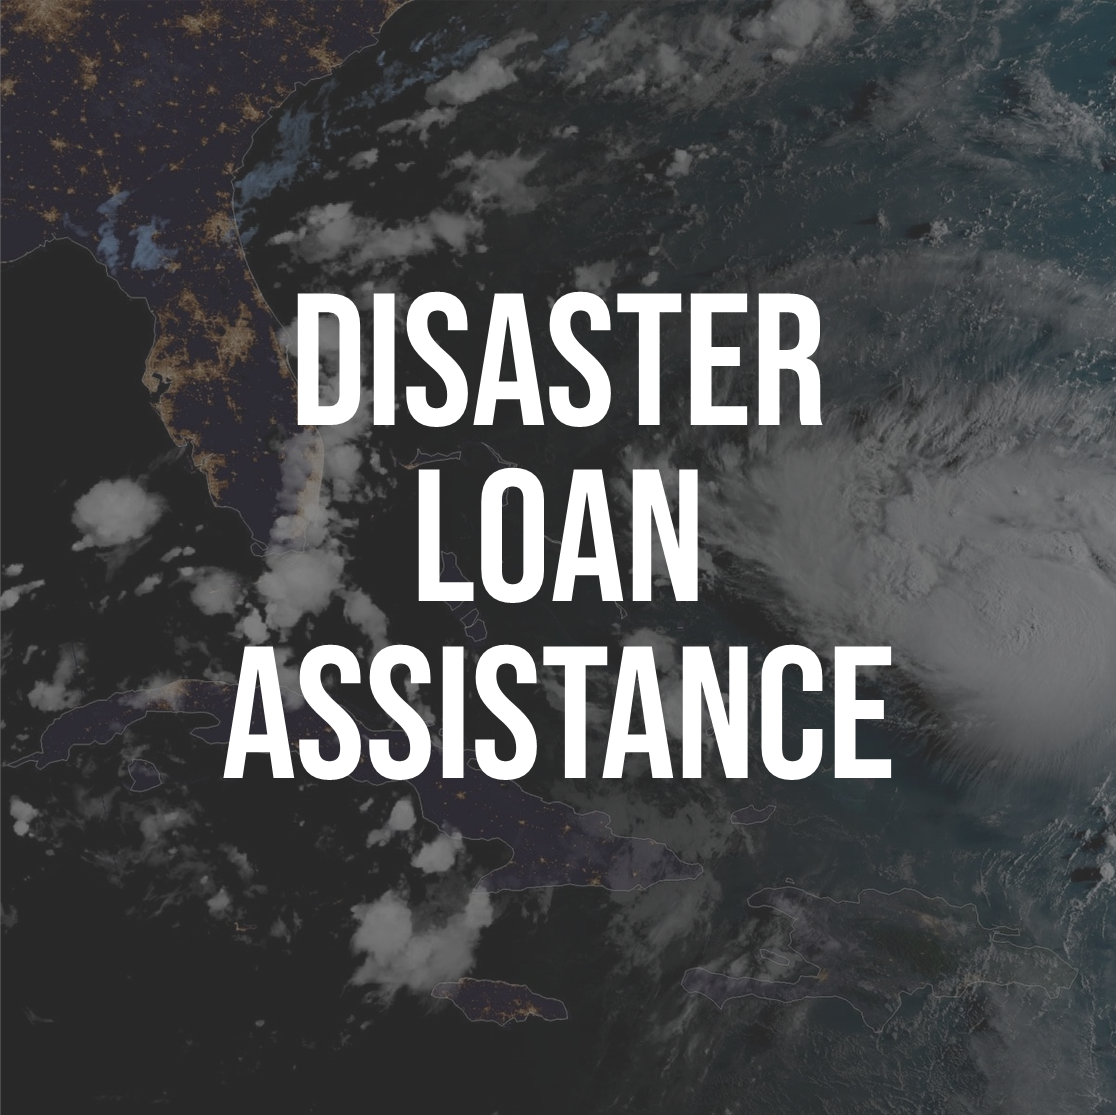 Disaster-assistance